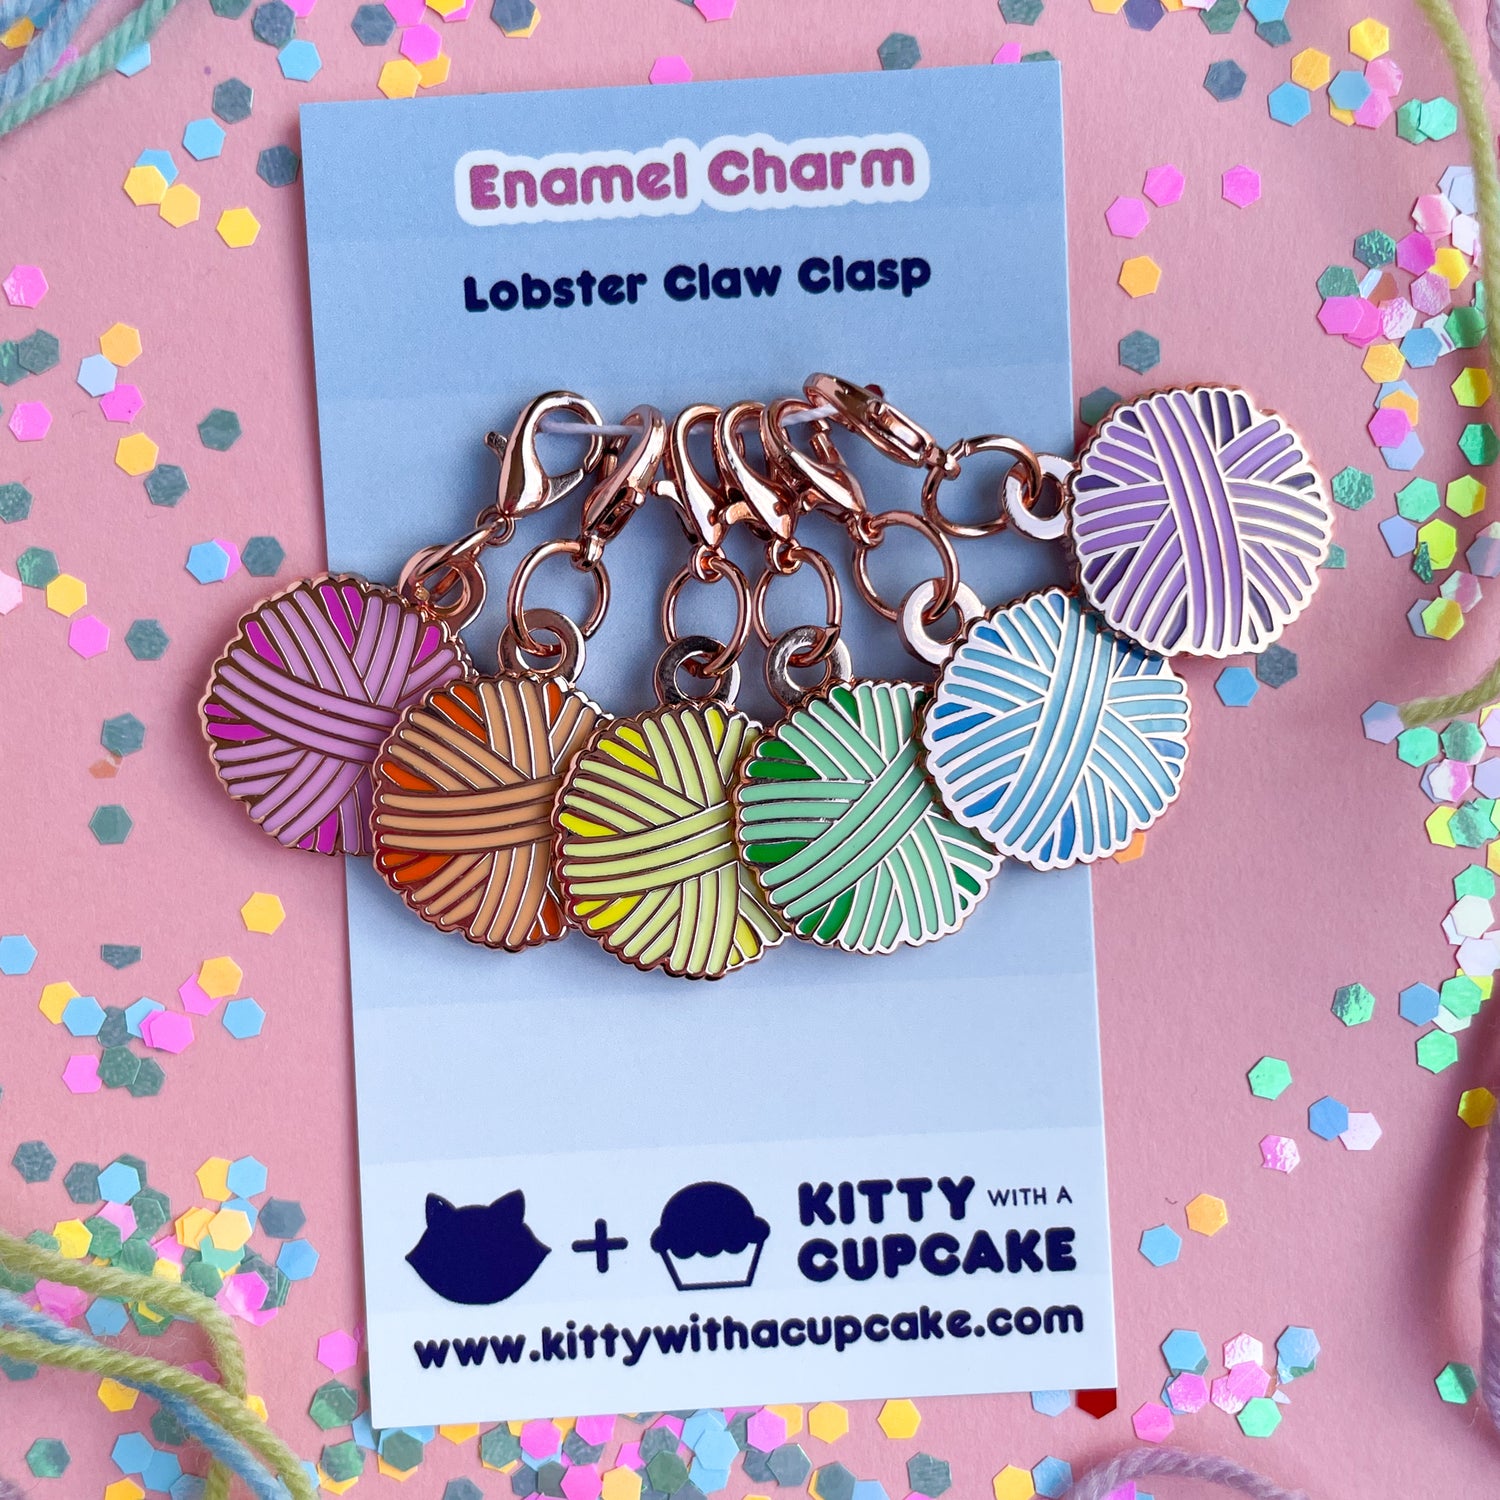 Six lobster claw clasp charms shaped like yarn balls in pink, orange, yellow, mint, blue, and purple on blue card. 